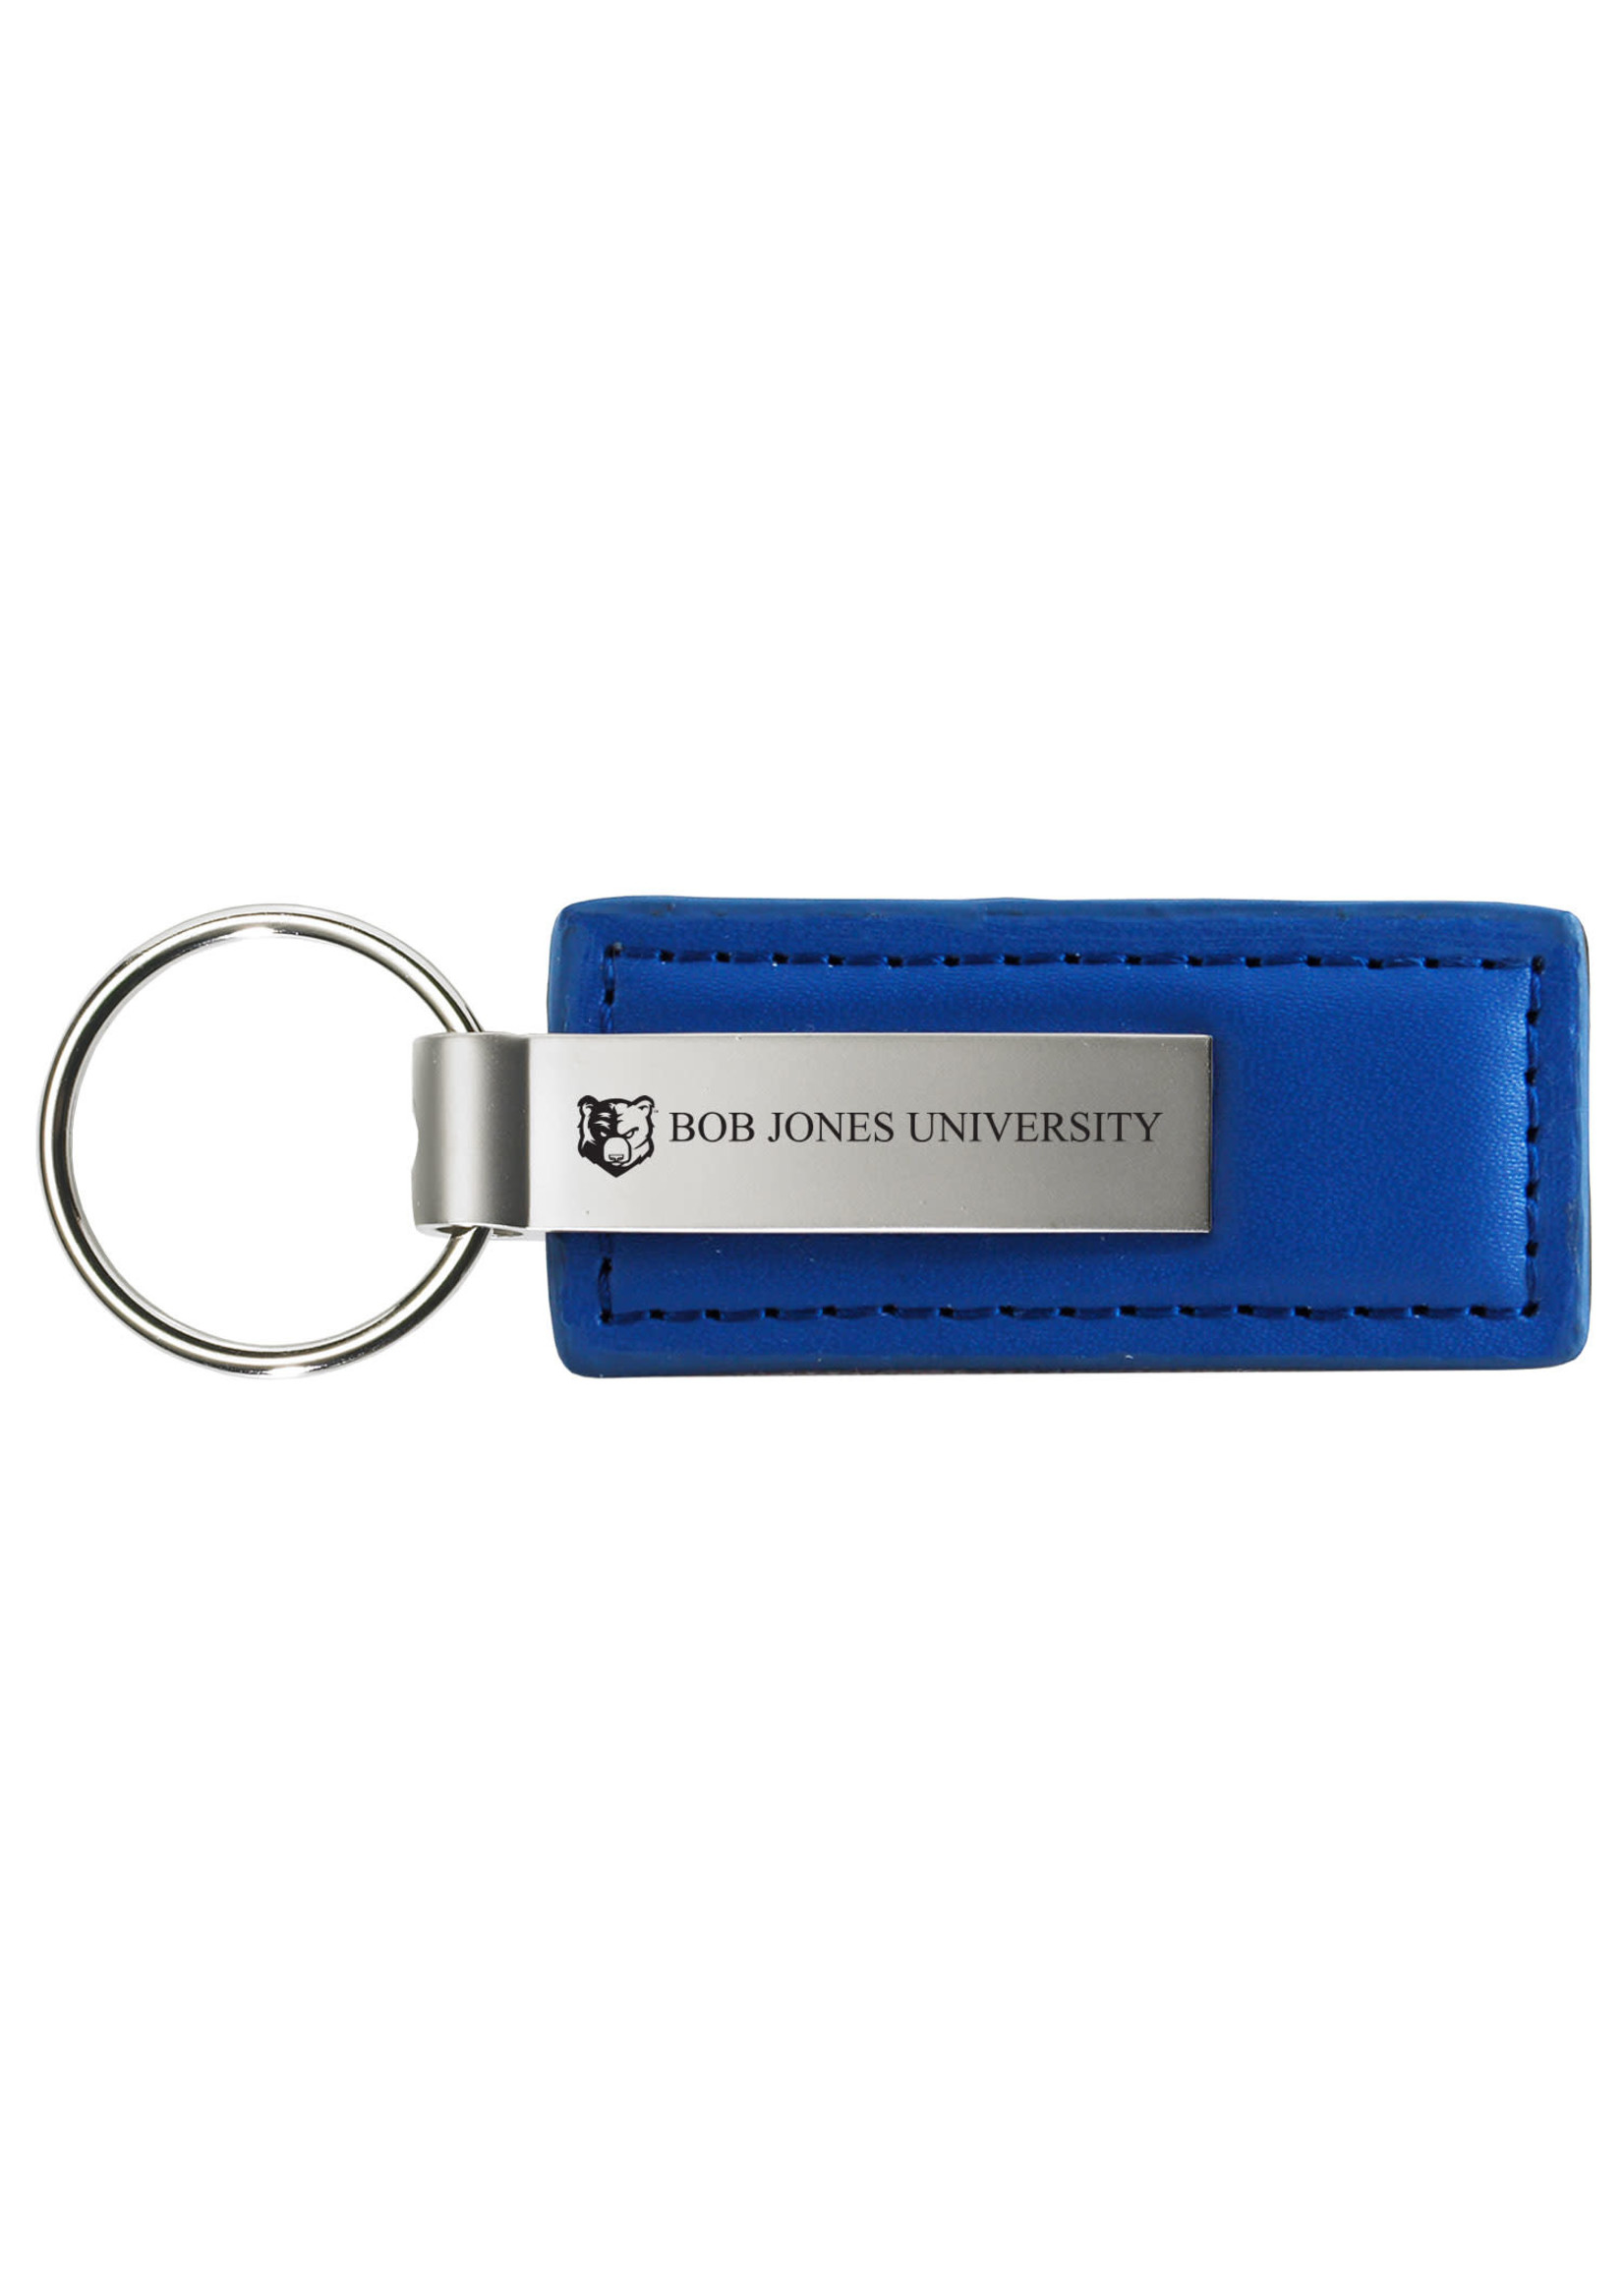 Bruins Key Chain Leather/Metal